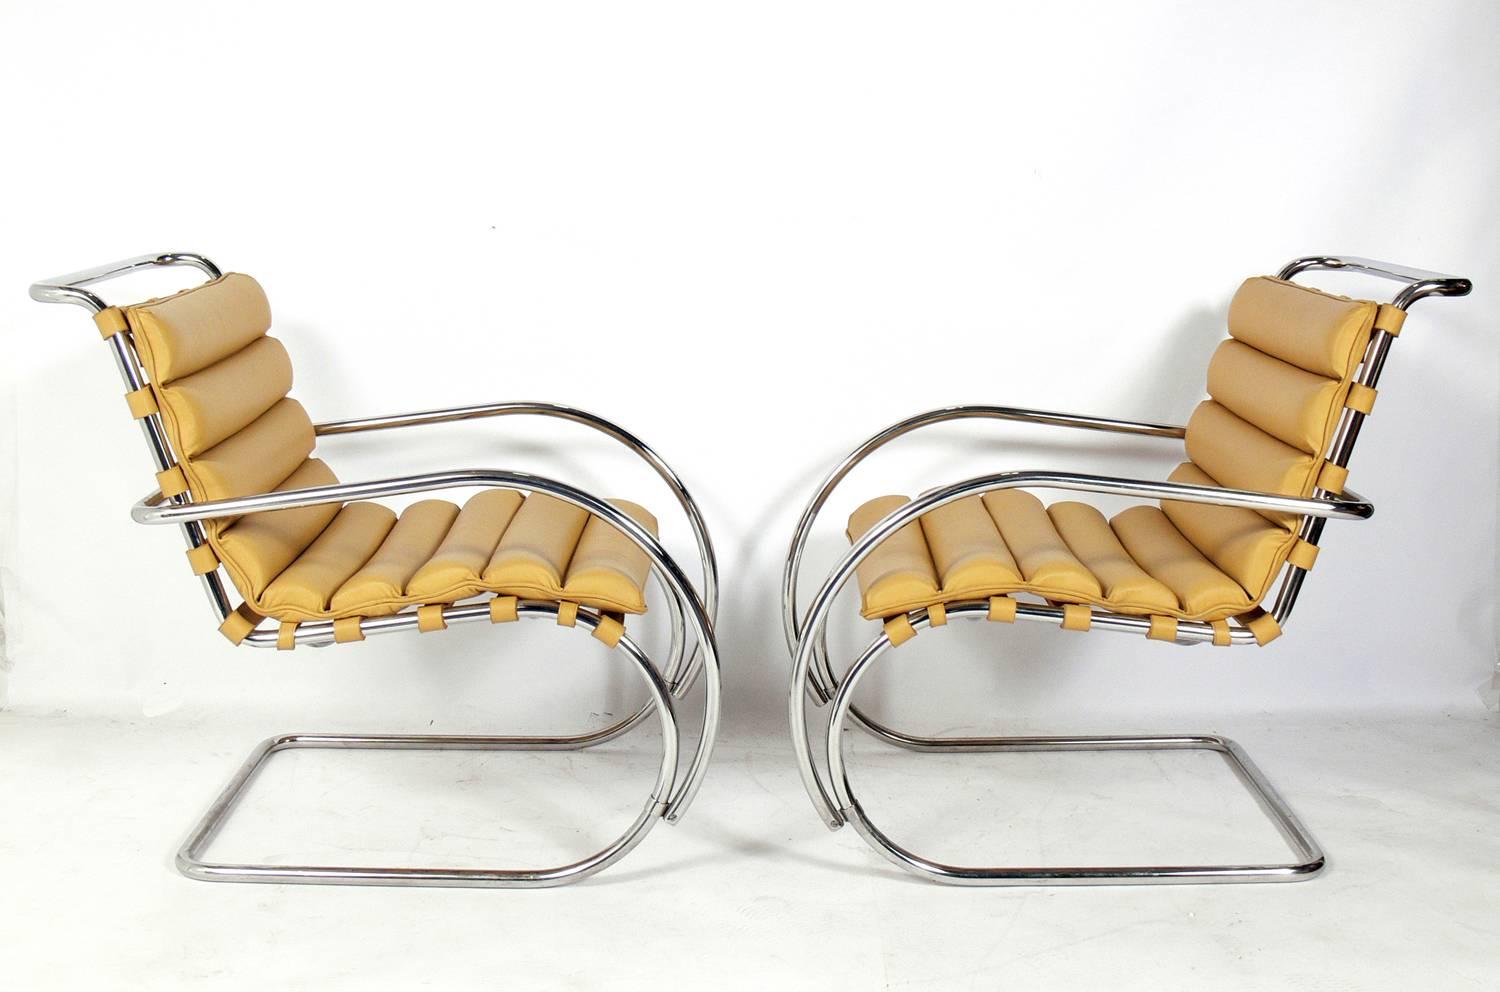 Pair of MR lounge chairs designed by Mies van der Rohe for Knoll, circa 2000s. Beautiful natural color leather. Signed with impressed Knoll mark to each chair.